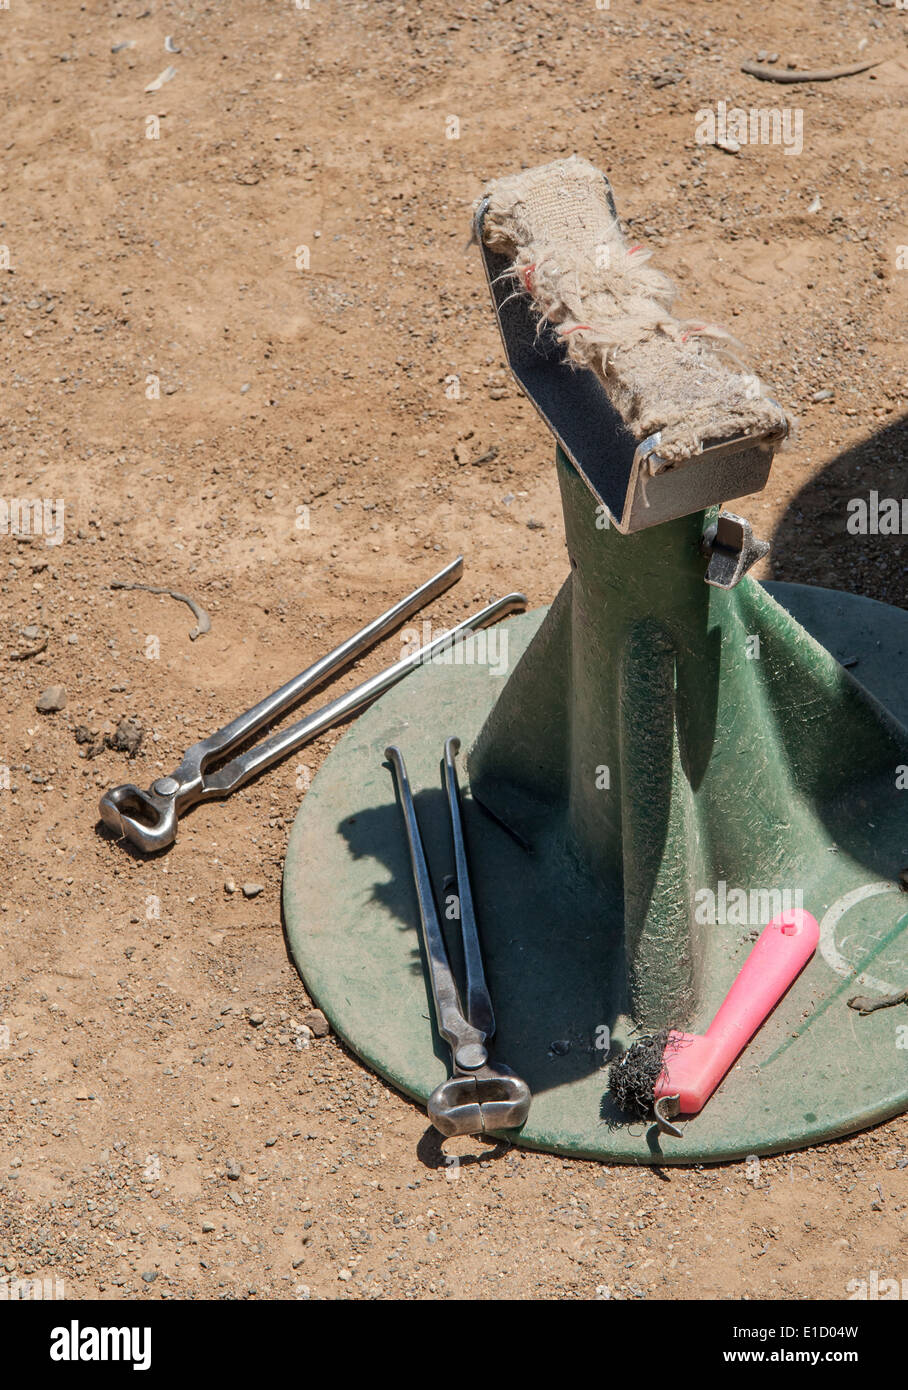 Farrier foot stand and trimming tools Stock Photo